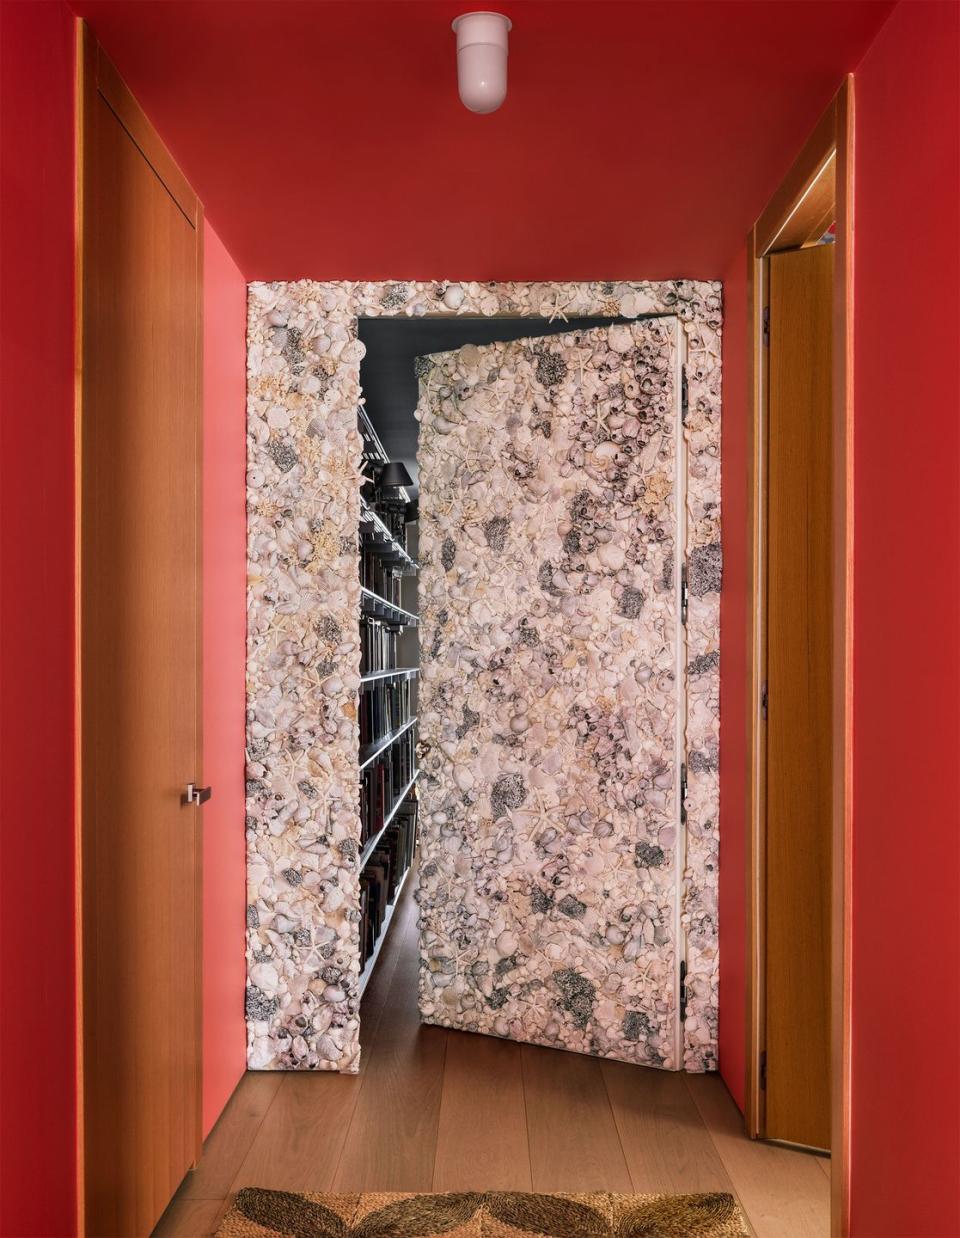 in a hallway with deep rose colored walls are two facing wood doors and at the end of the hall is a door encrusted with seashells that is open just a crack to reveal a room with shelves along the wall